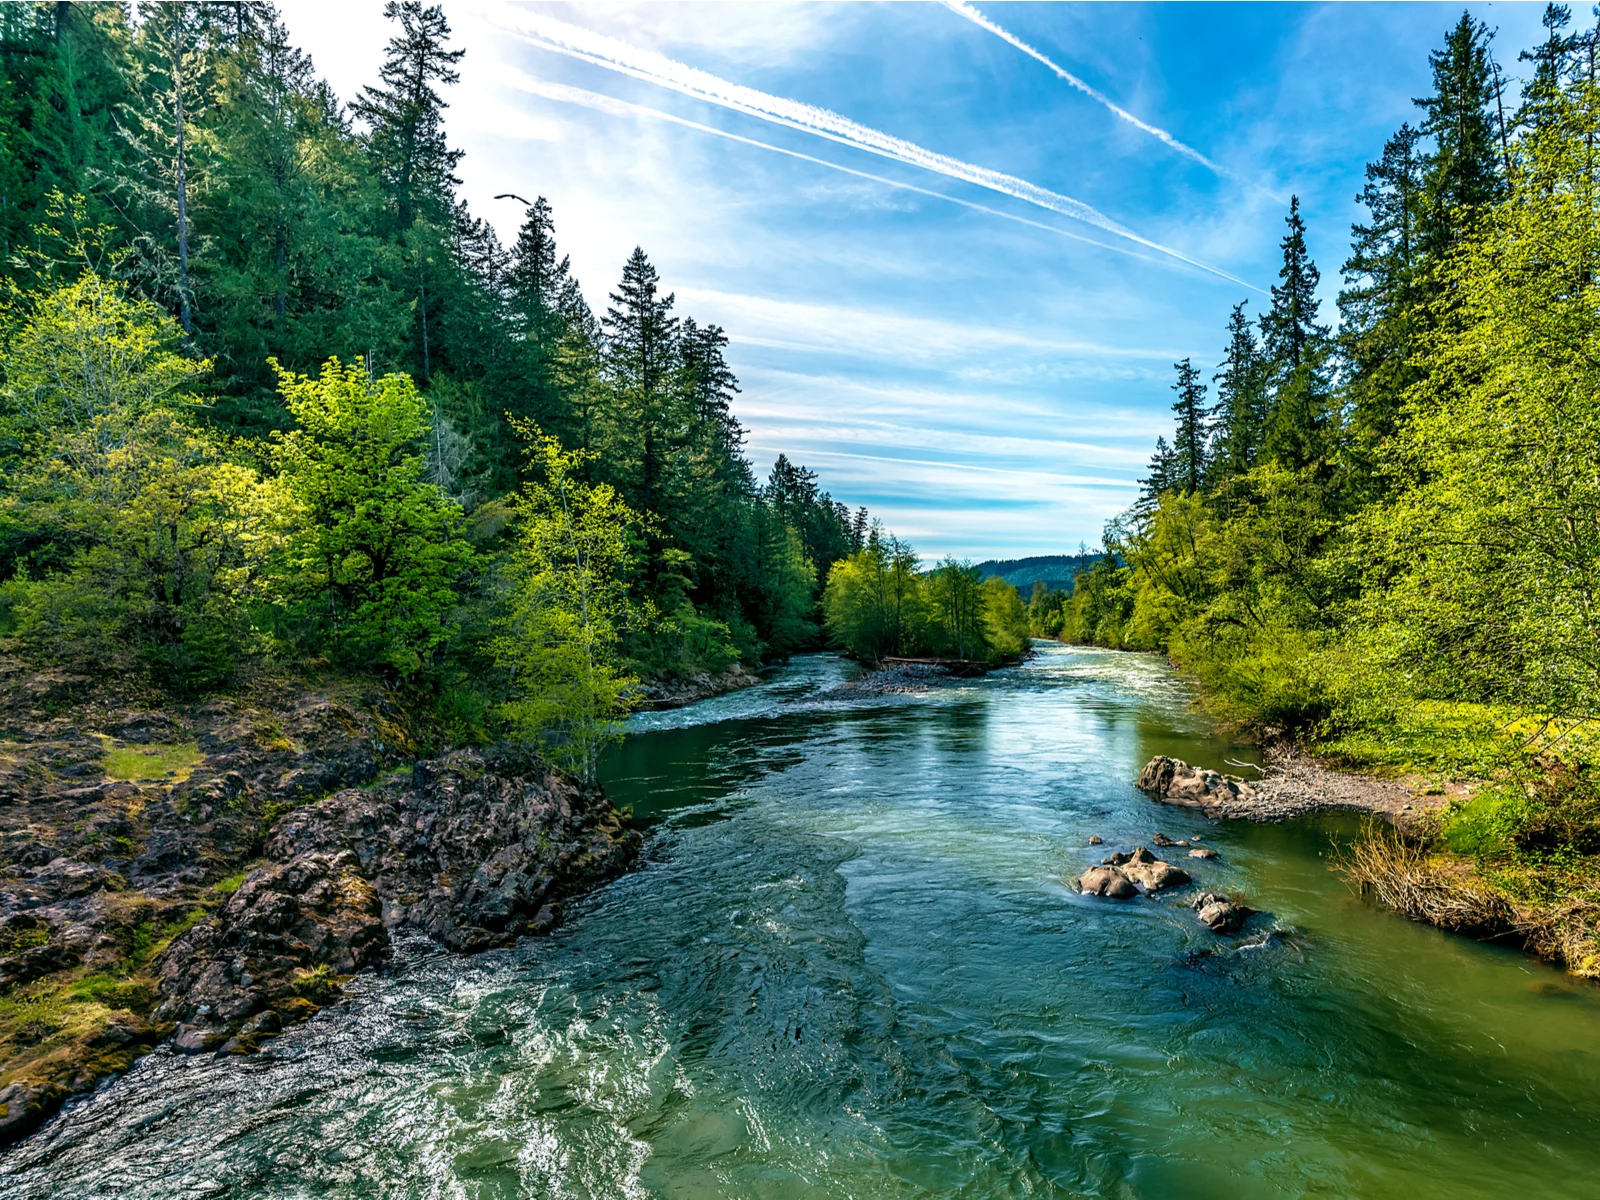 Bright blue river flowing through a forest during the best time to visit Oregon